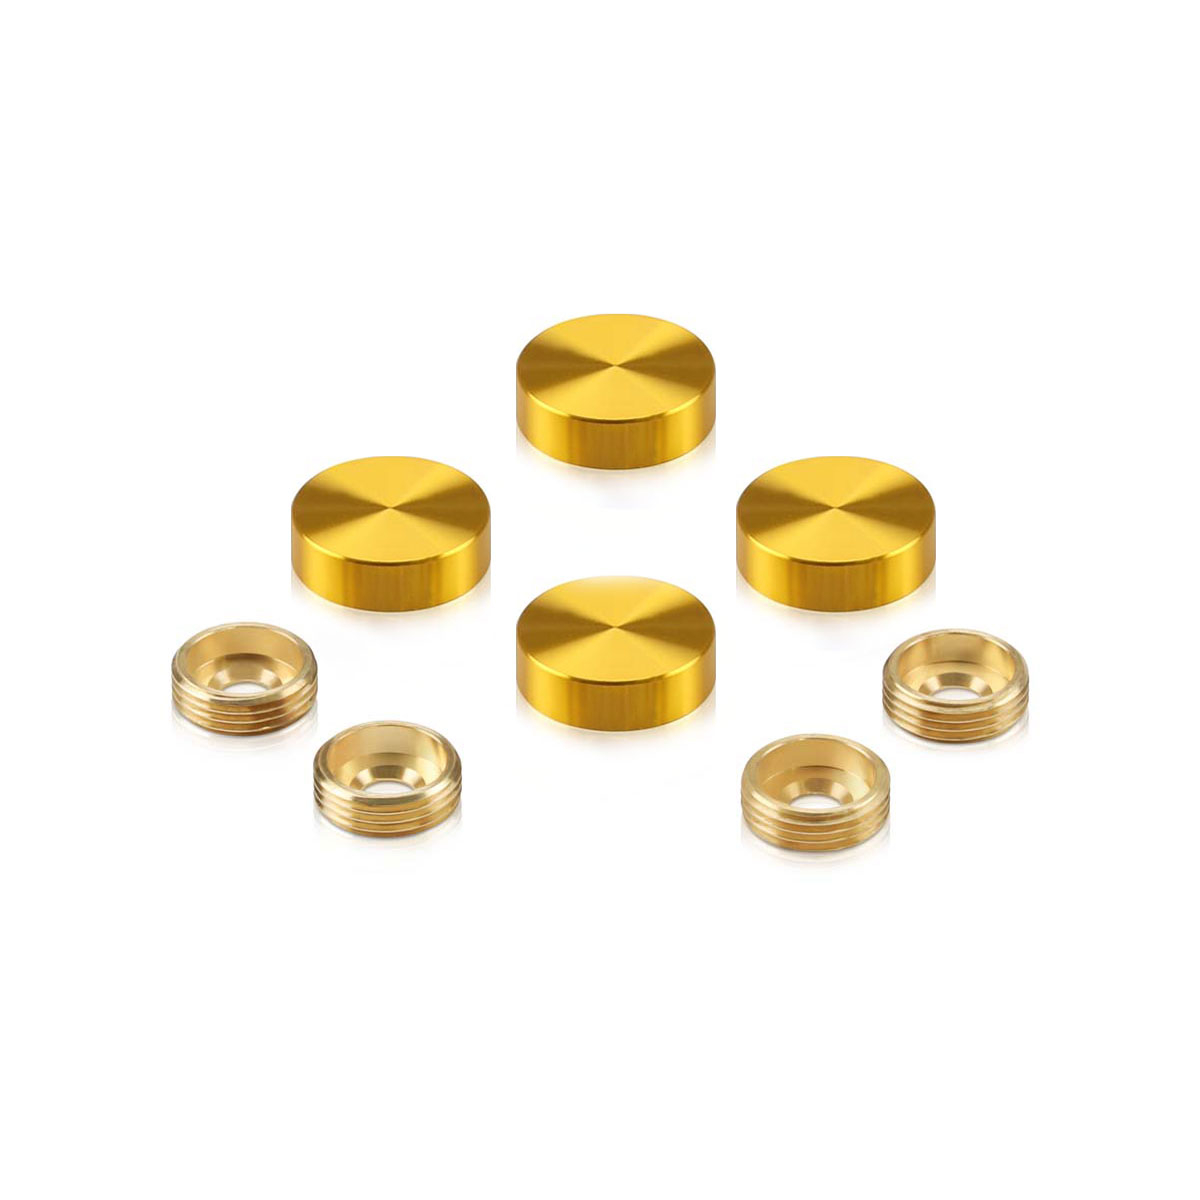 Set of 4 Screw Cover, Diameter: 3/4'', Aluminum Gold Anodized Finish (Indoor or Outdoor Use), Special for 3/16'' Diameter TAPCON Screw Slotted Hex (TAPCON Screw Sold Separatly)